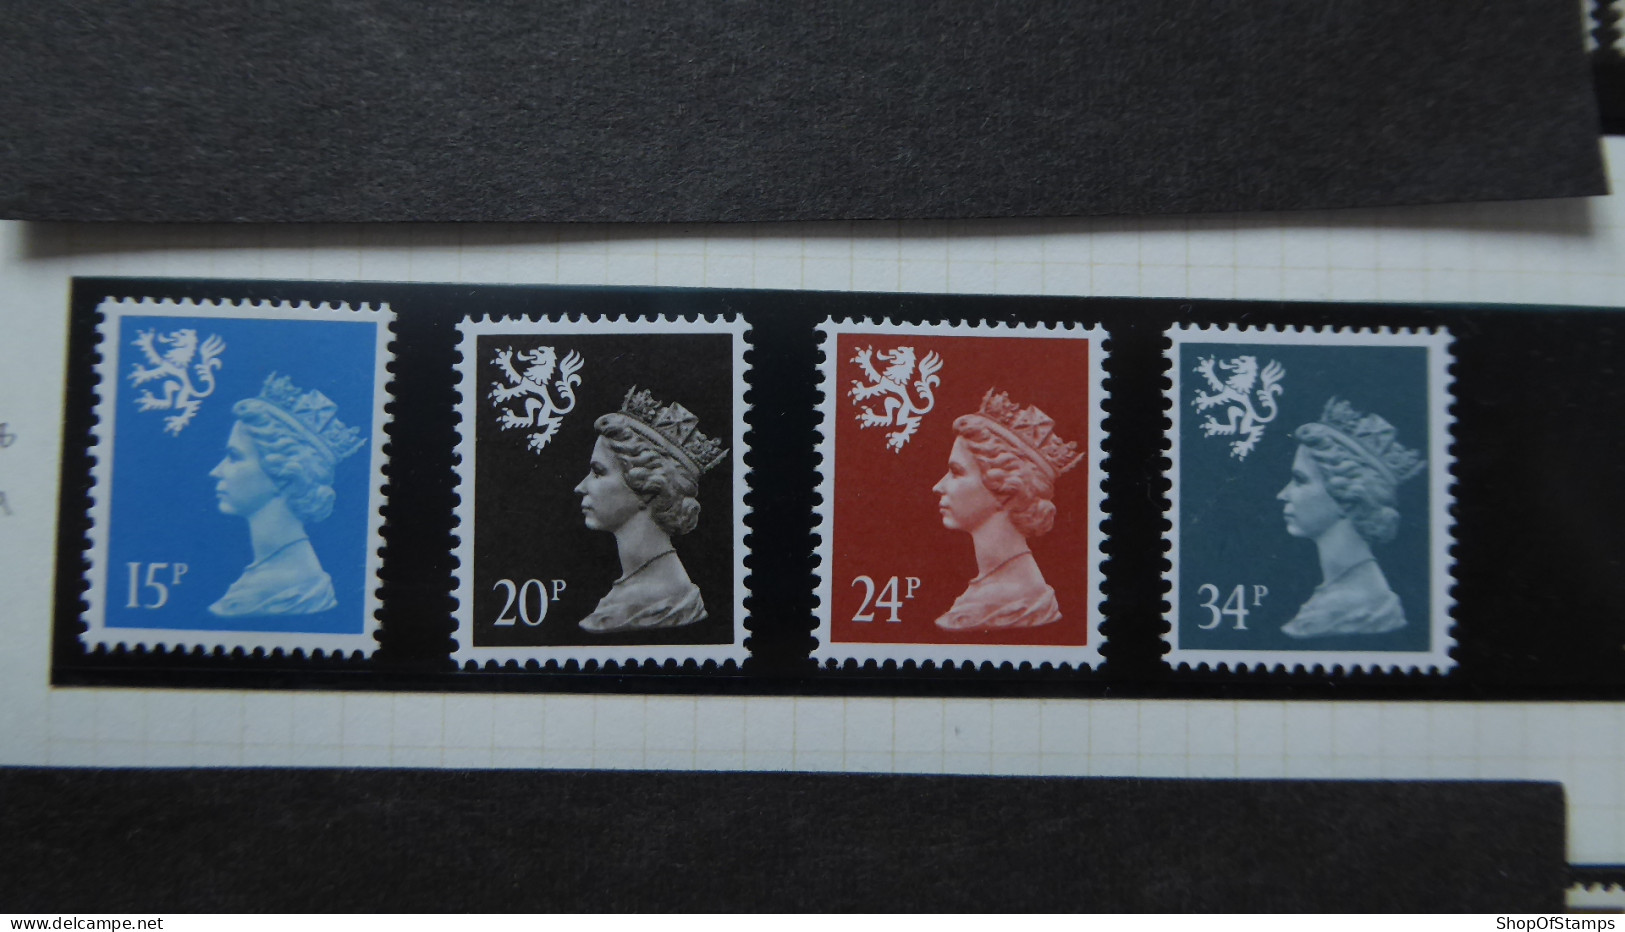 GREAT BRITAIN SG S35/78 [SCOTLAND] 4 Stamps Mint - Franking Machines (EMA)